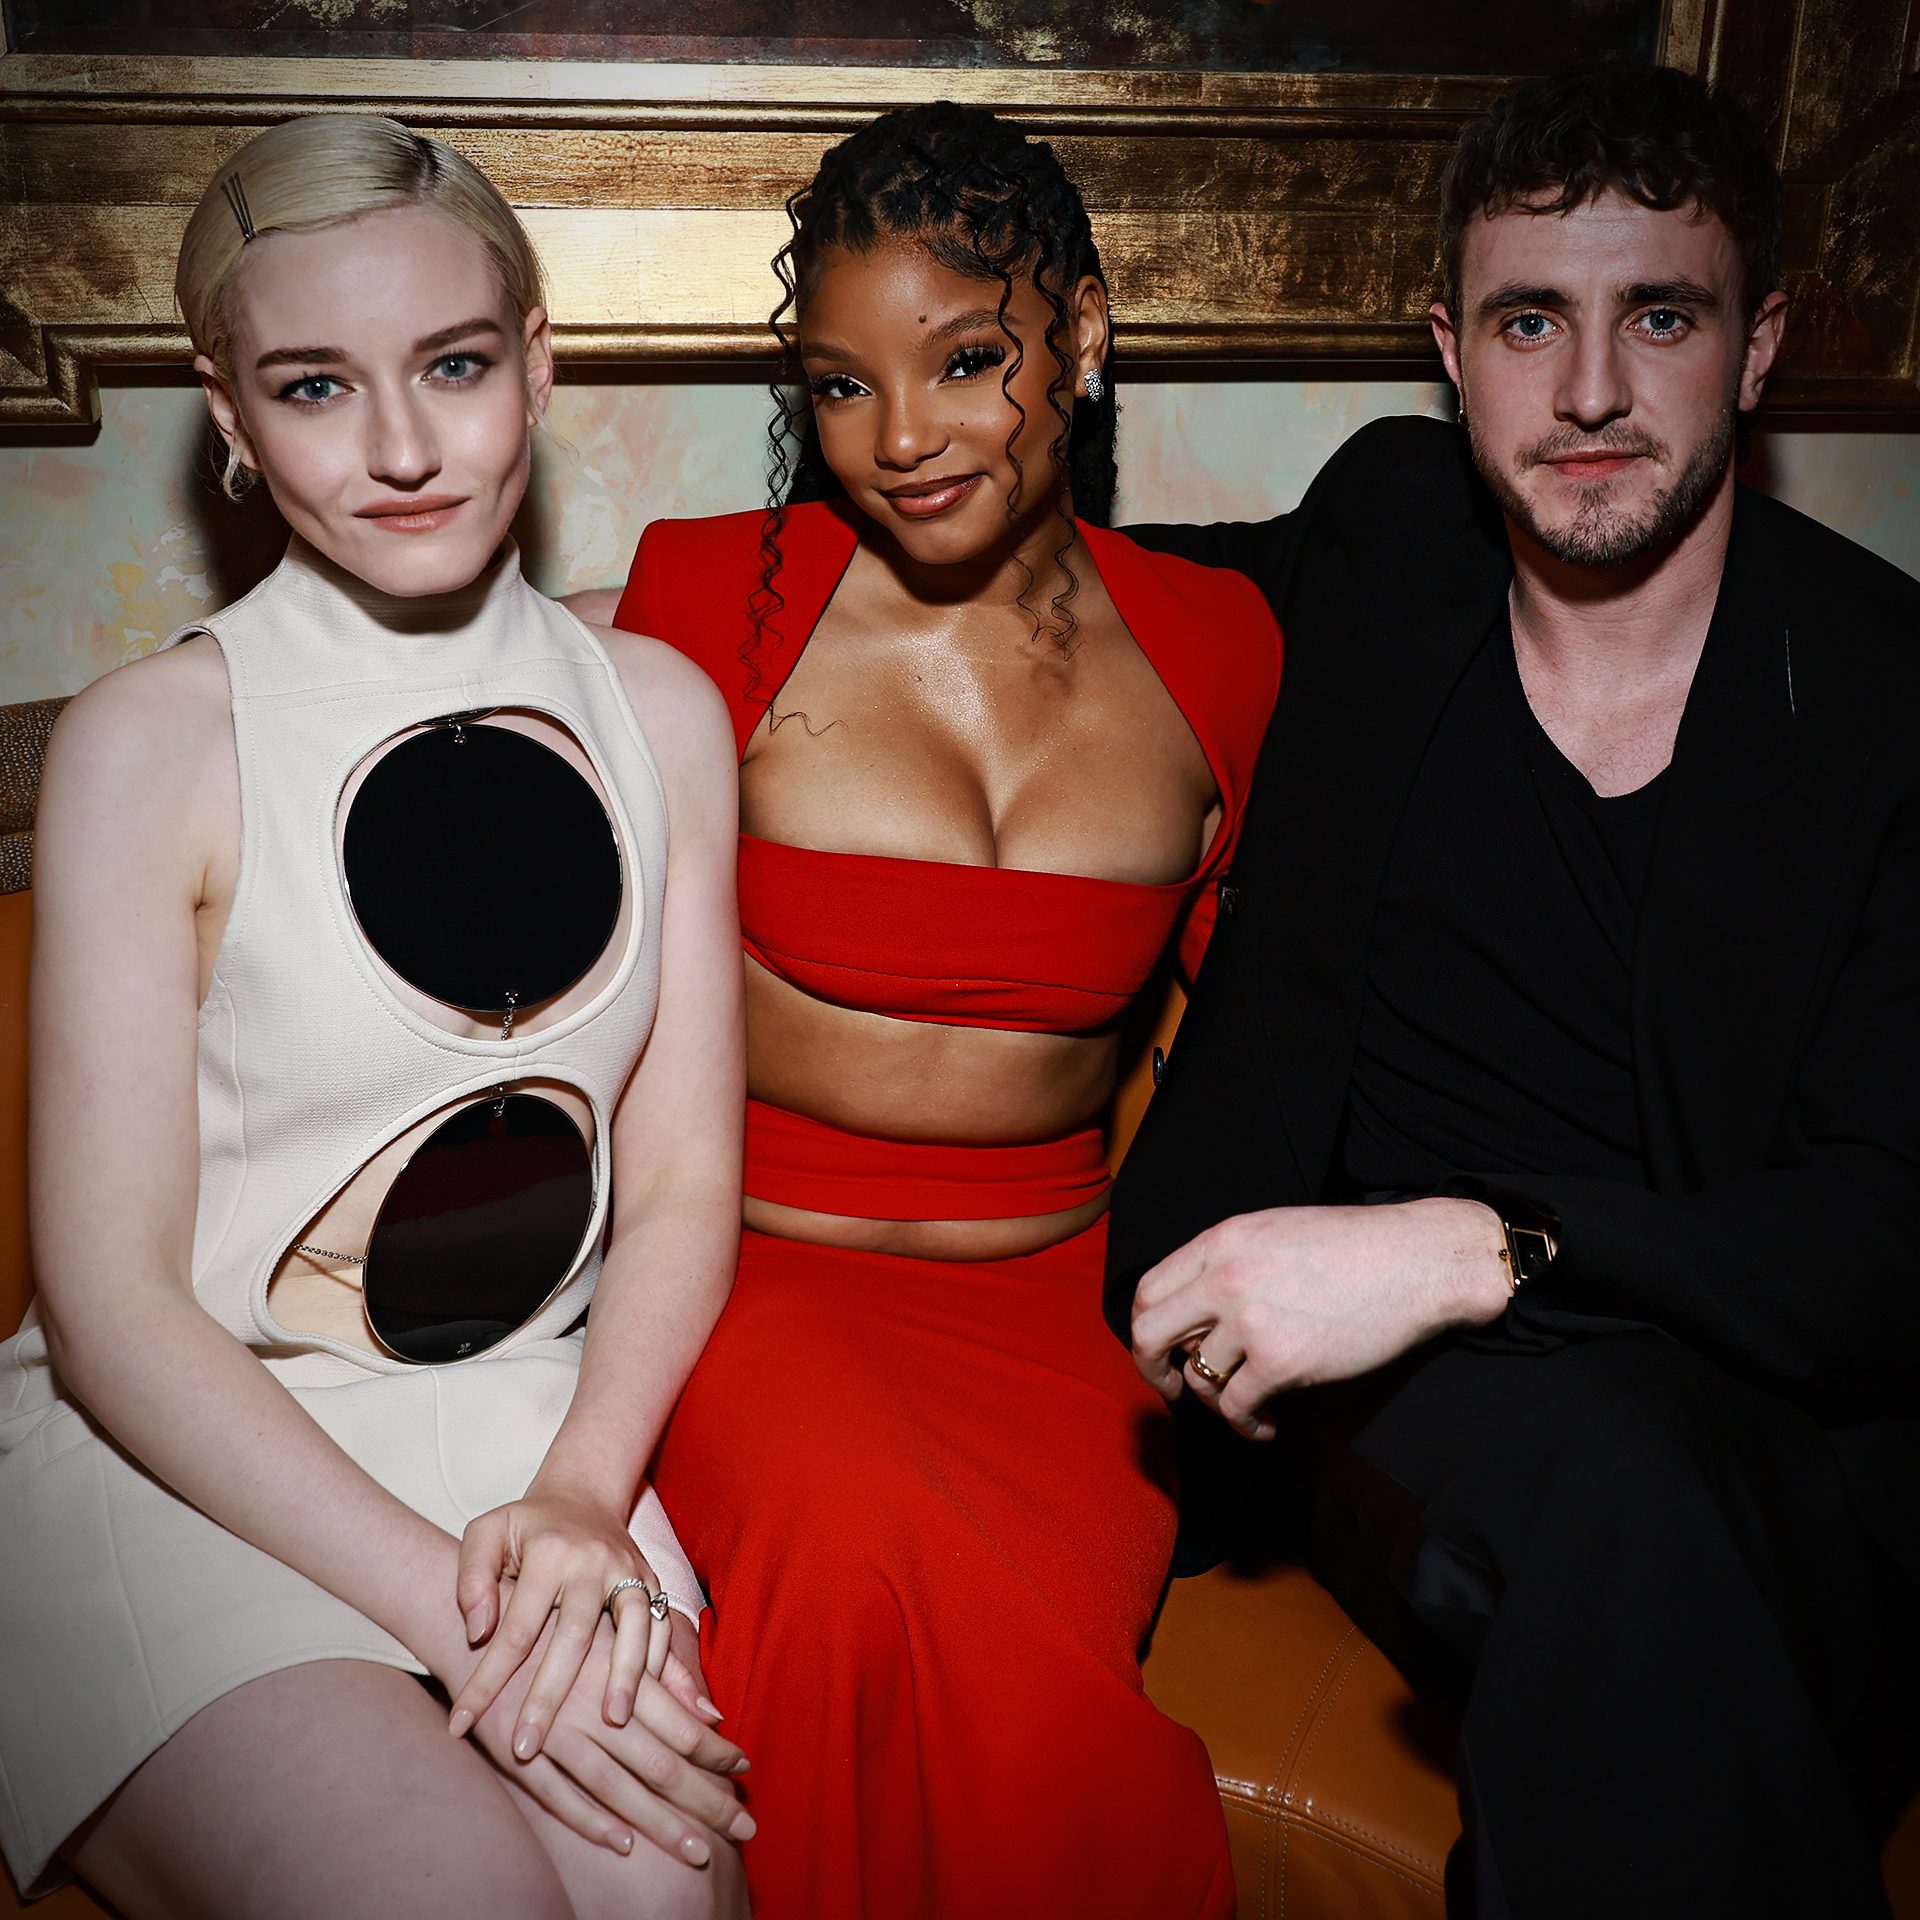 LOS ANGELES, CALIFORNIA - MARCH 08: (L-R) Julia Garner, Halle Bailey and Paul Mescal attend Vanity Fair And TikTok Celebrate Vanities: A Night For Young Hollywood In Los Angeles on March 08, 2023 in Los Angeles, California. (Photo by Matt Winkelmeyer/Getty Images for Vanity Fair) via 360 MAGAZINE.